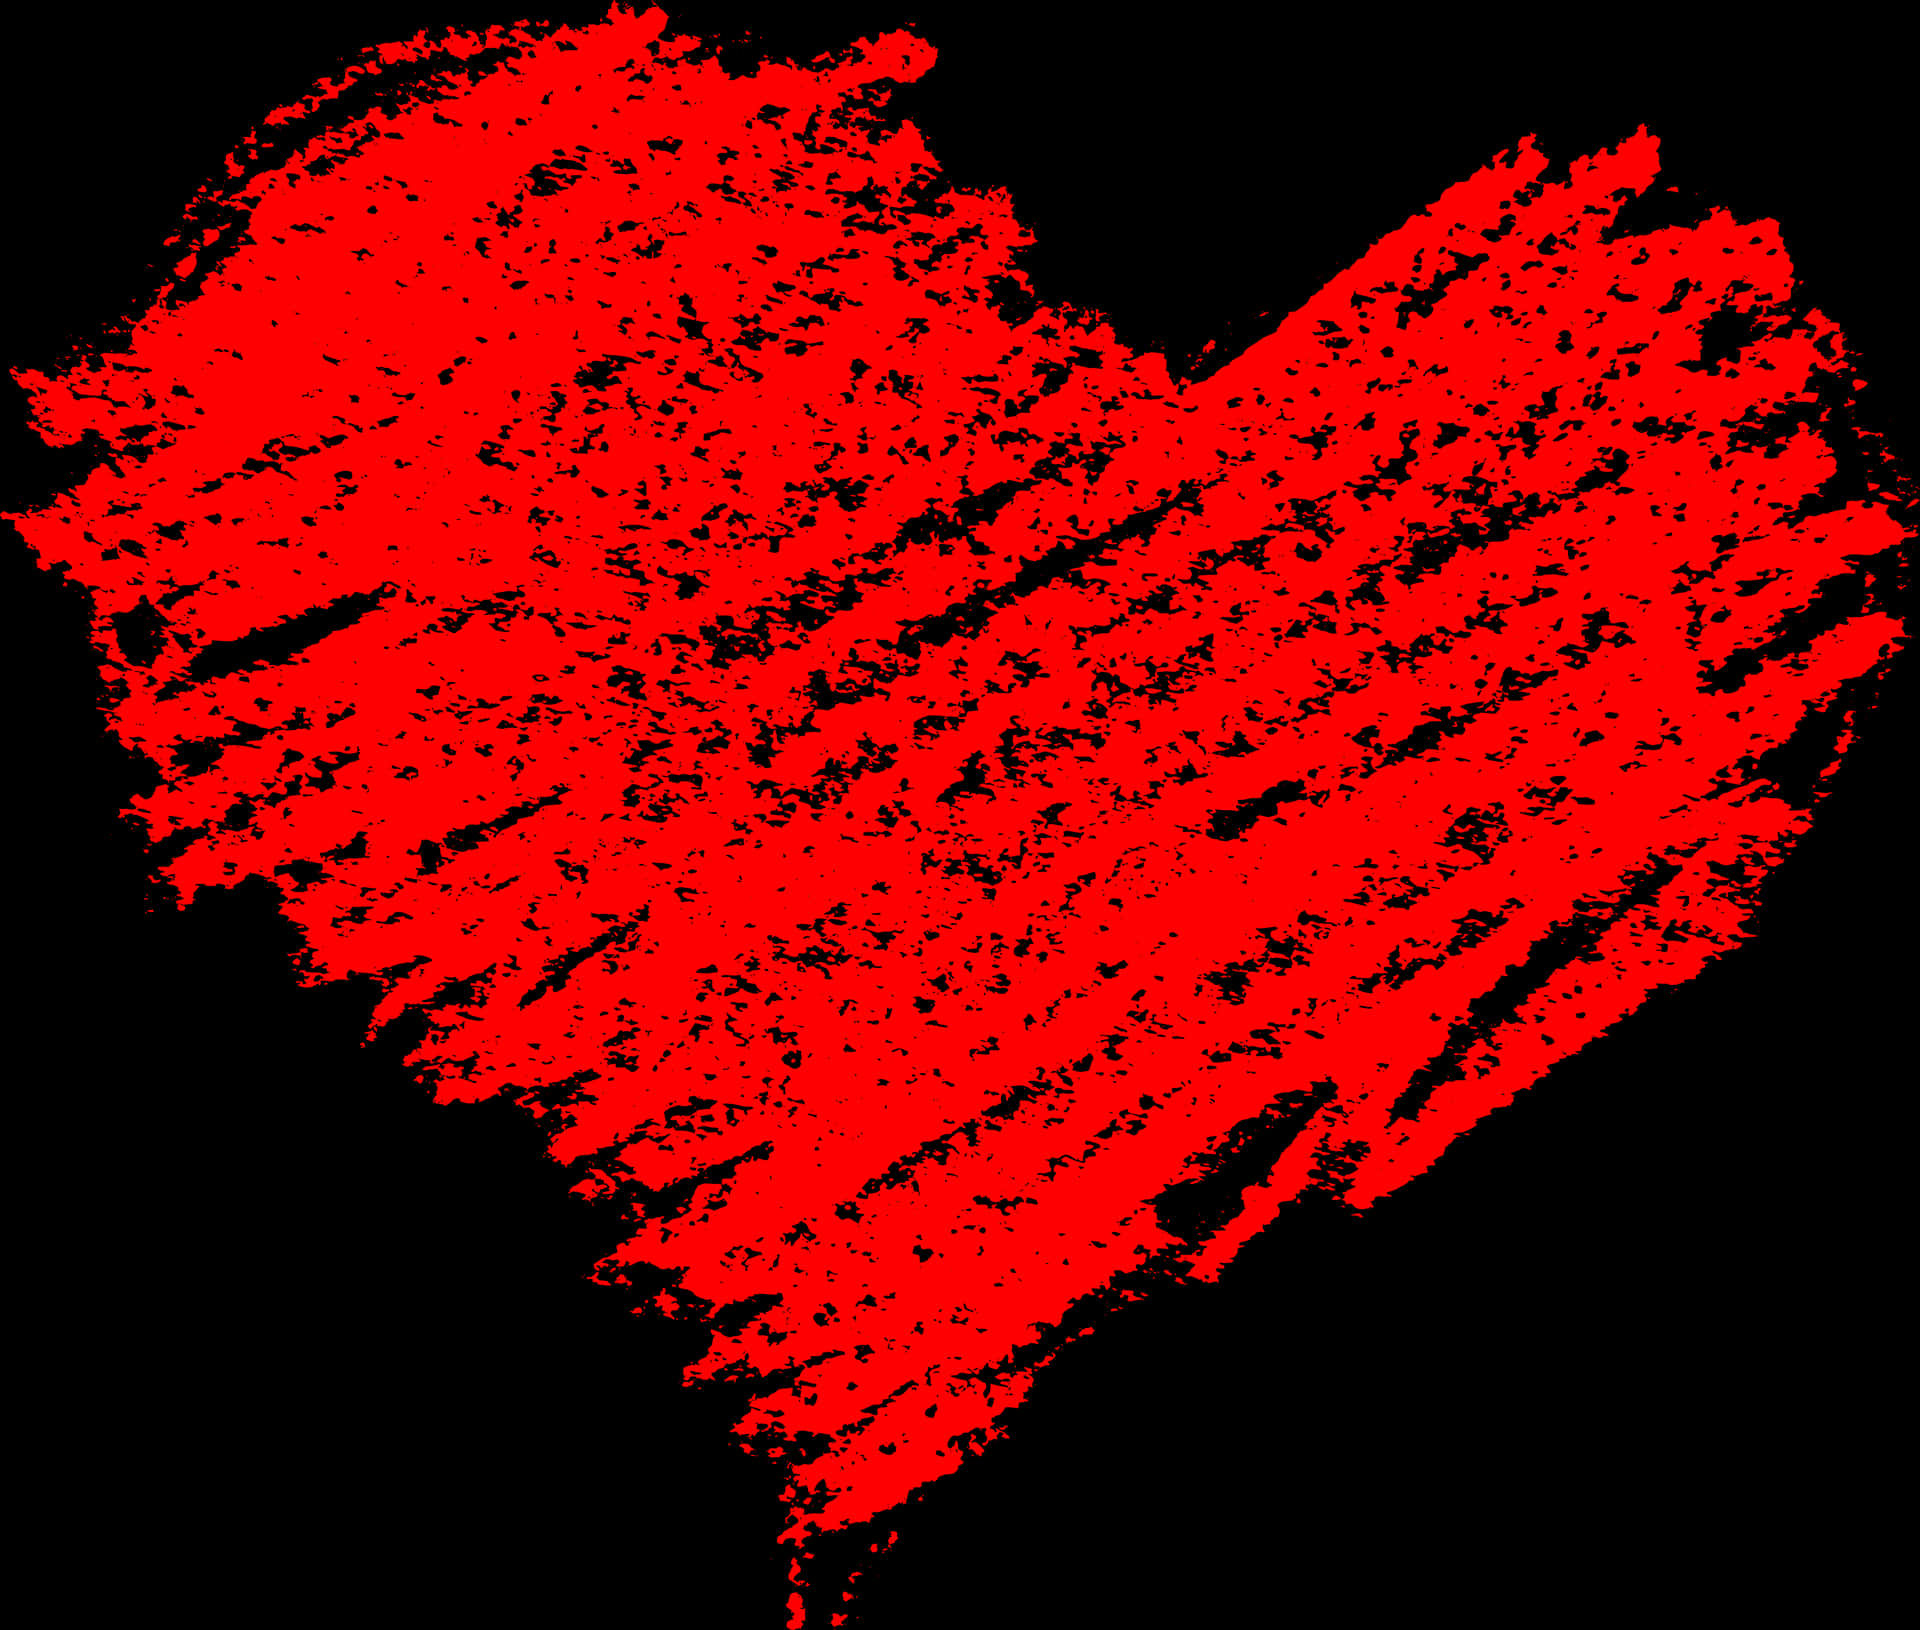 Red Grungy Heart Texture PNG image